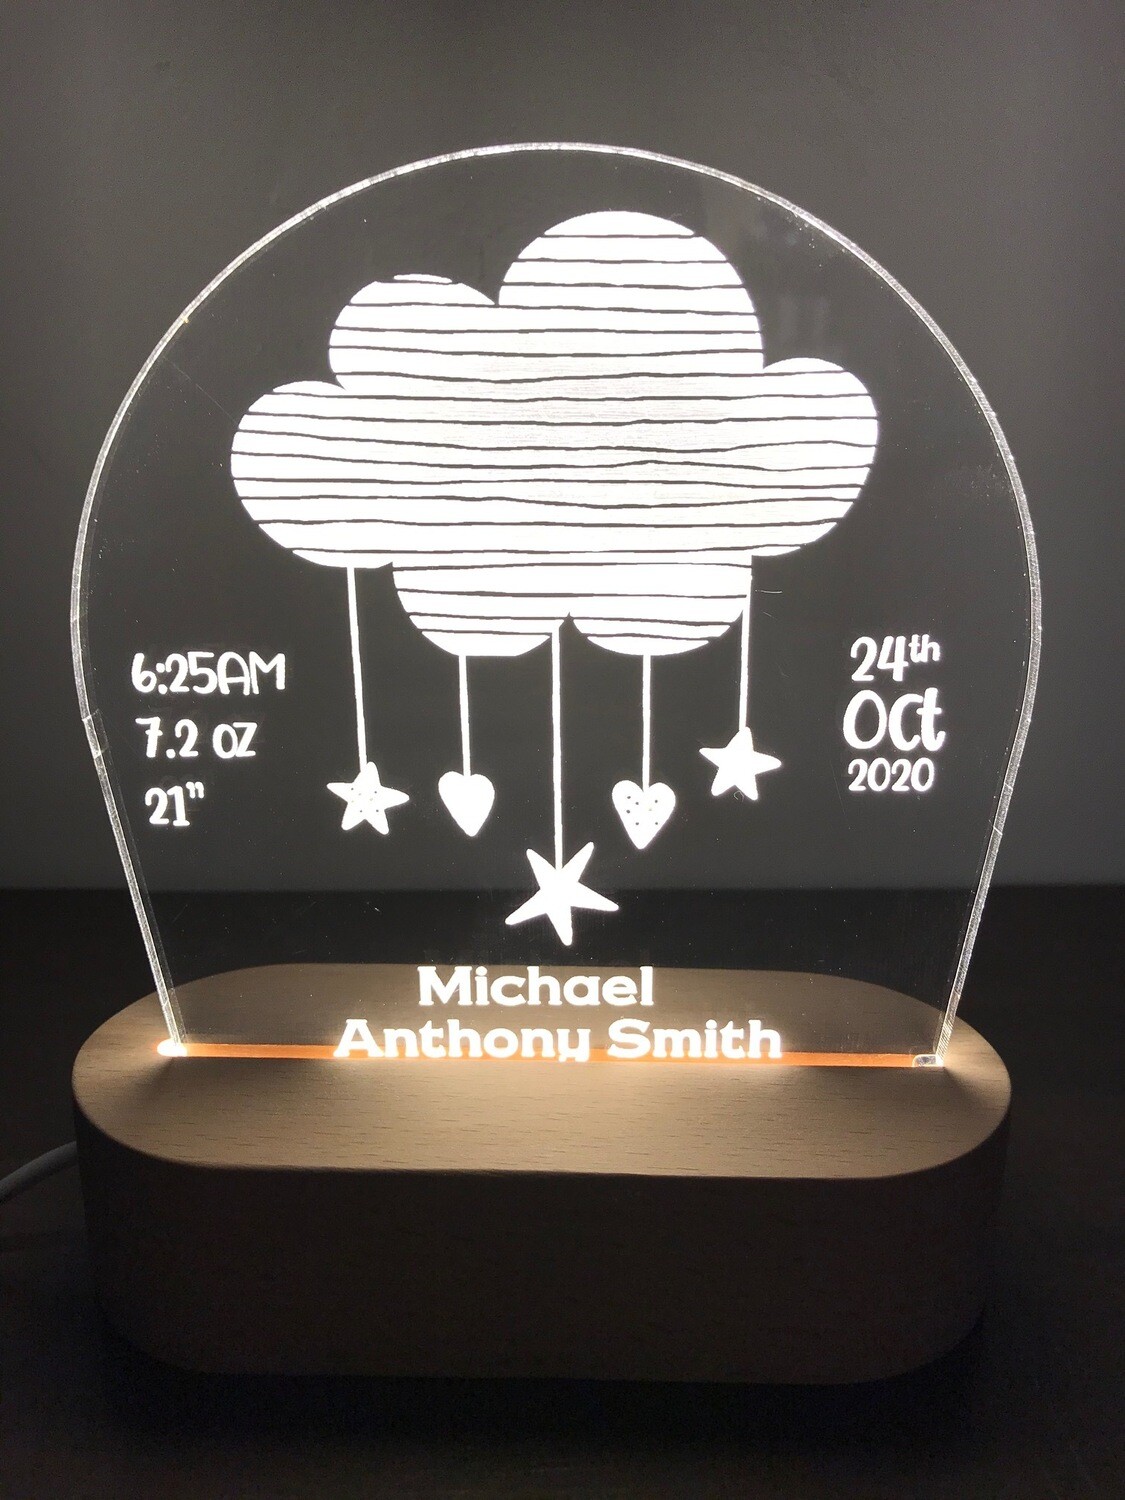 LED Cloud Lamp with Name, Date, Time, Weight, Height